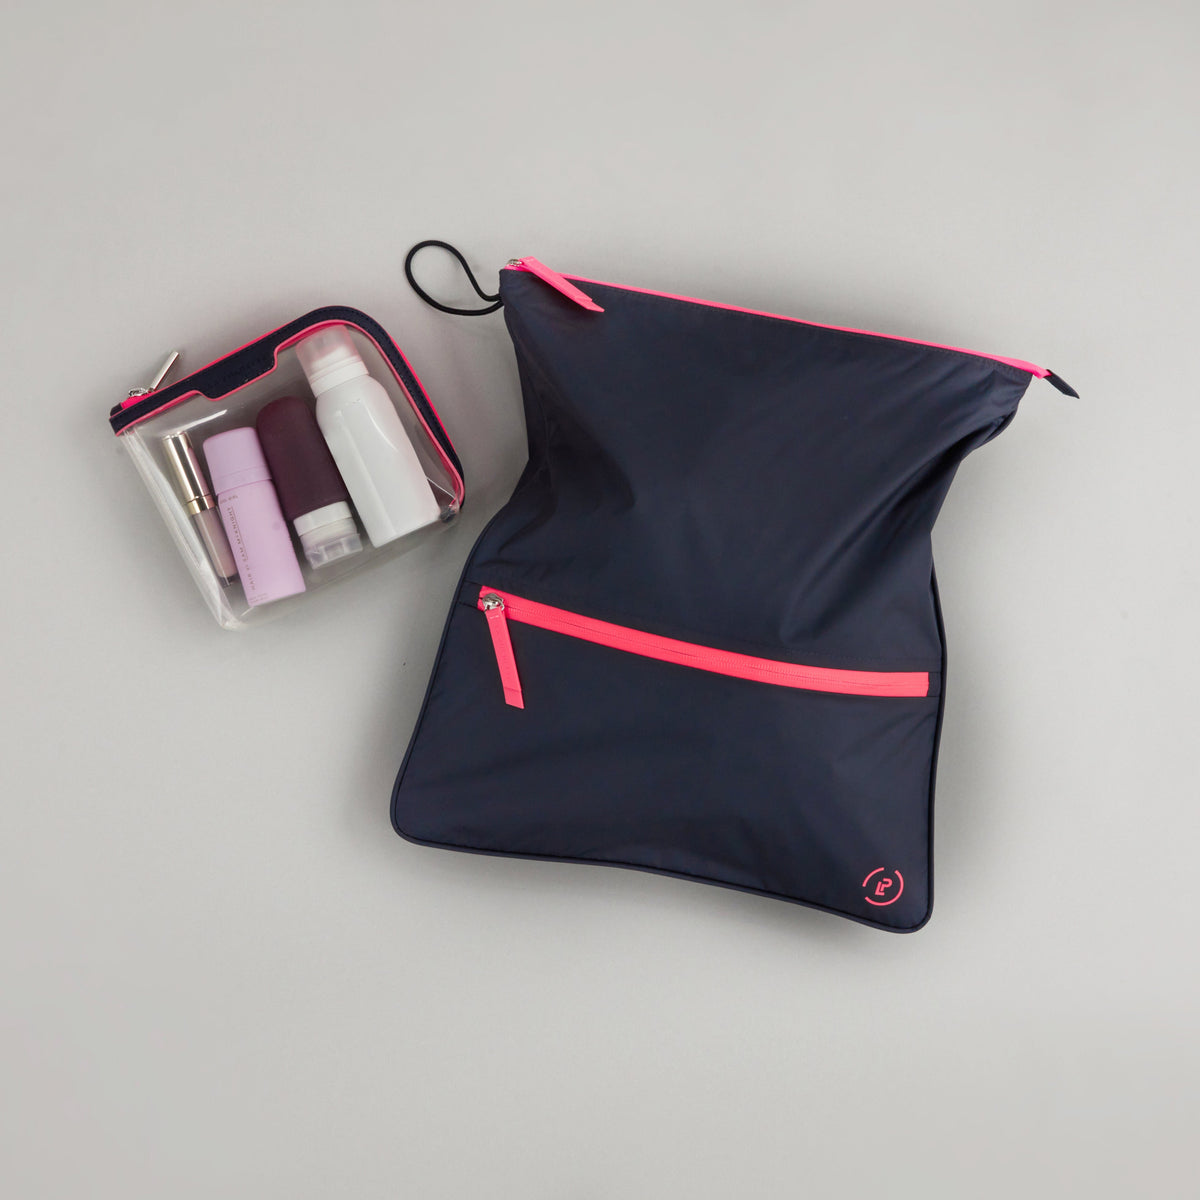 Small Anywhere Everywhere Pouch in Midnight Neon Pink colourway containing beauty accessories next to Sweat Bag in Midnight Neon Pink colourway 